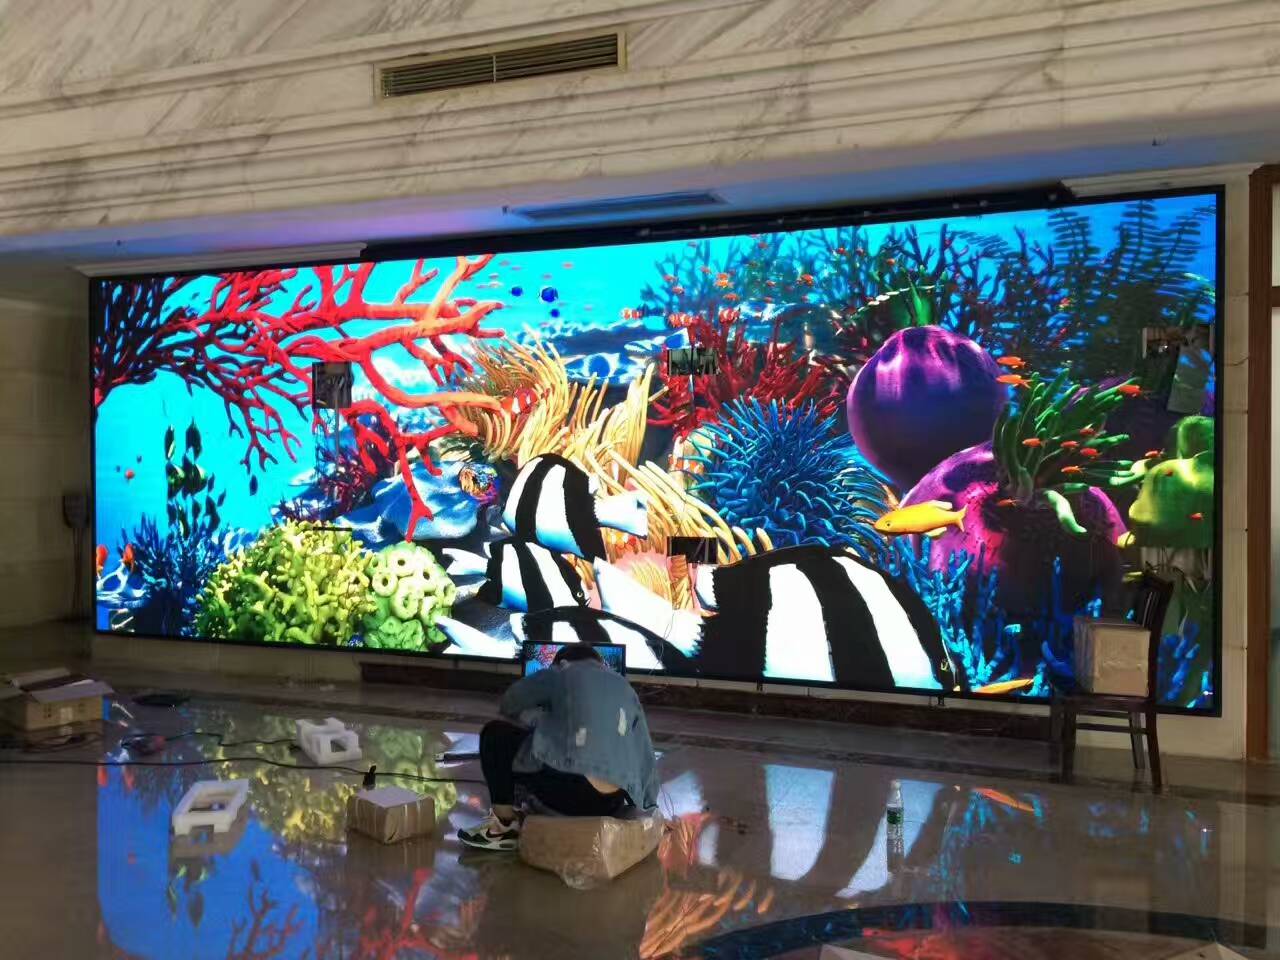 P2.5 HD indoor LED full color display is installed